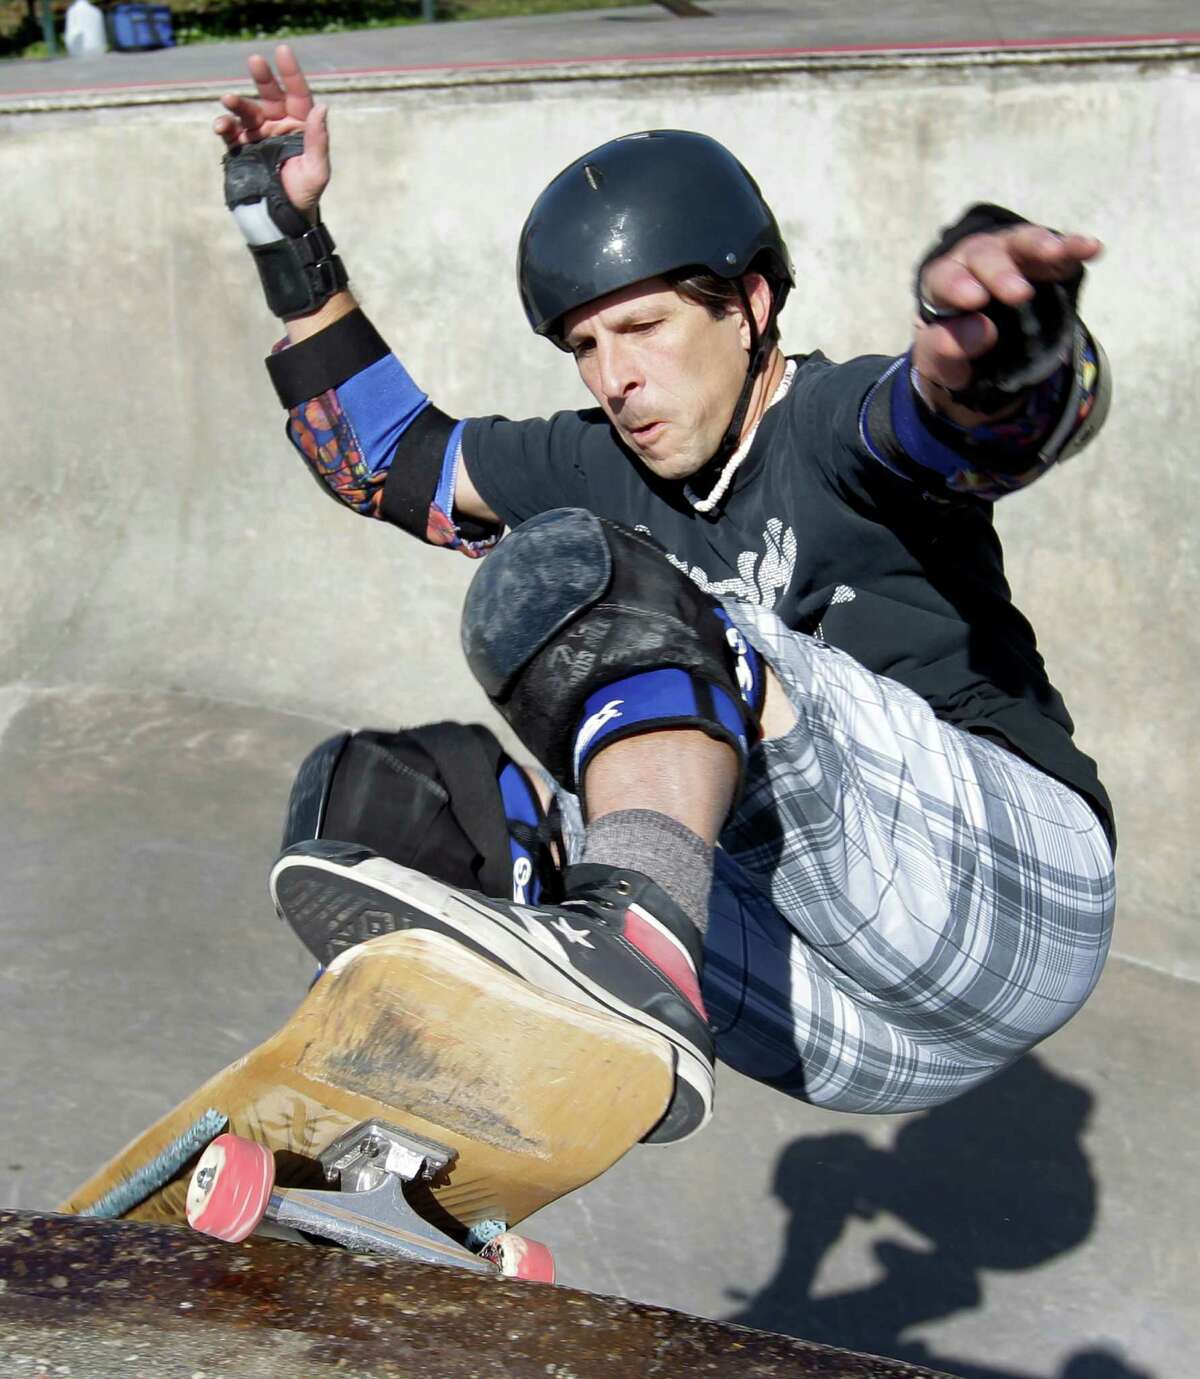 Barry Blumenthal skates at Joe Jamail Skatepark. ﻿To promote safety, Blumenthal is part of a group that has given away more than 1,500 helmets since 2008﻿.